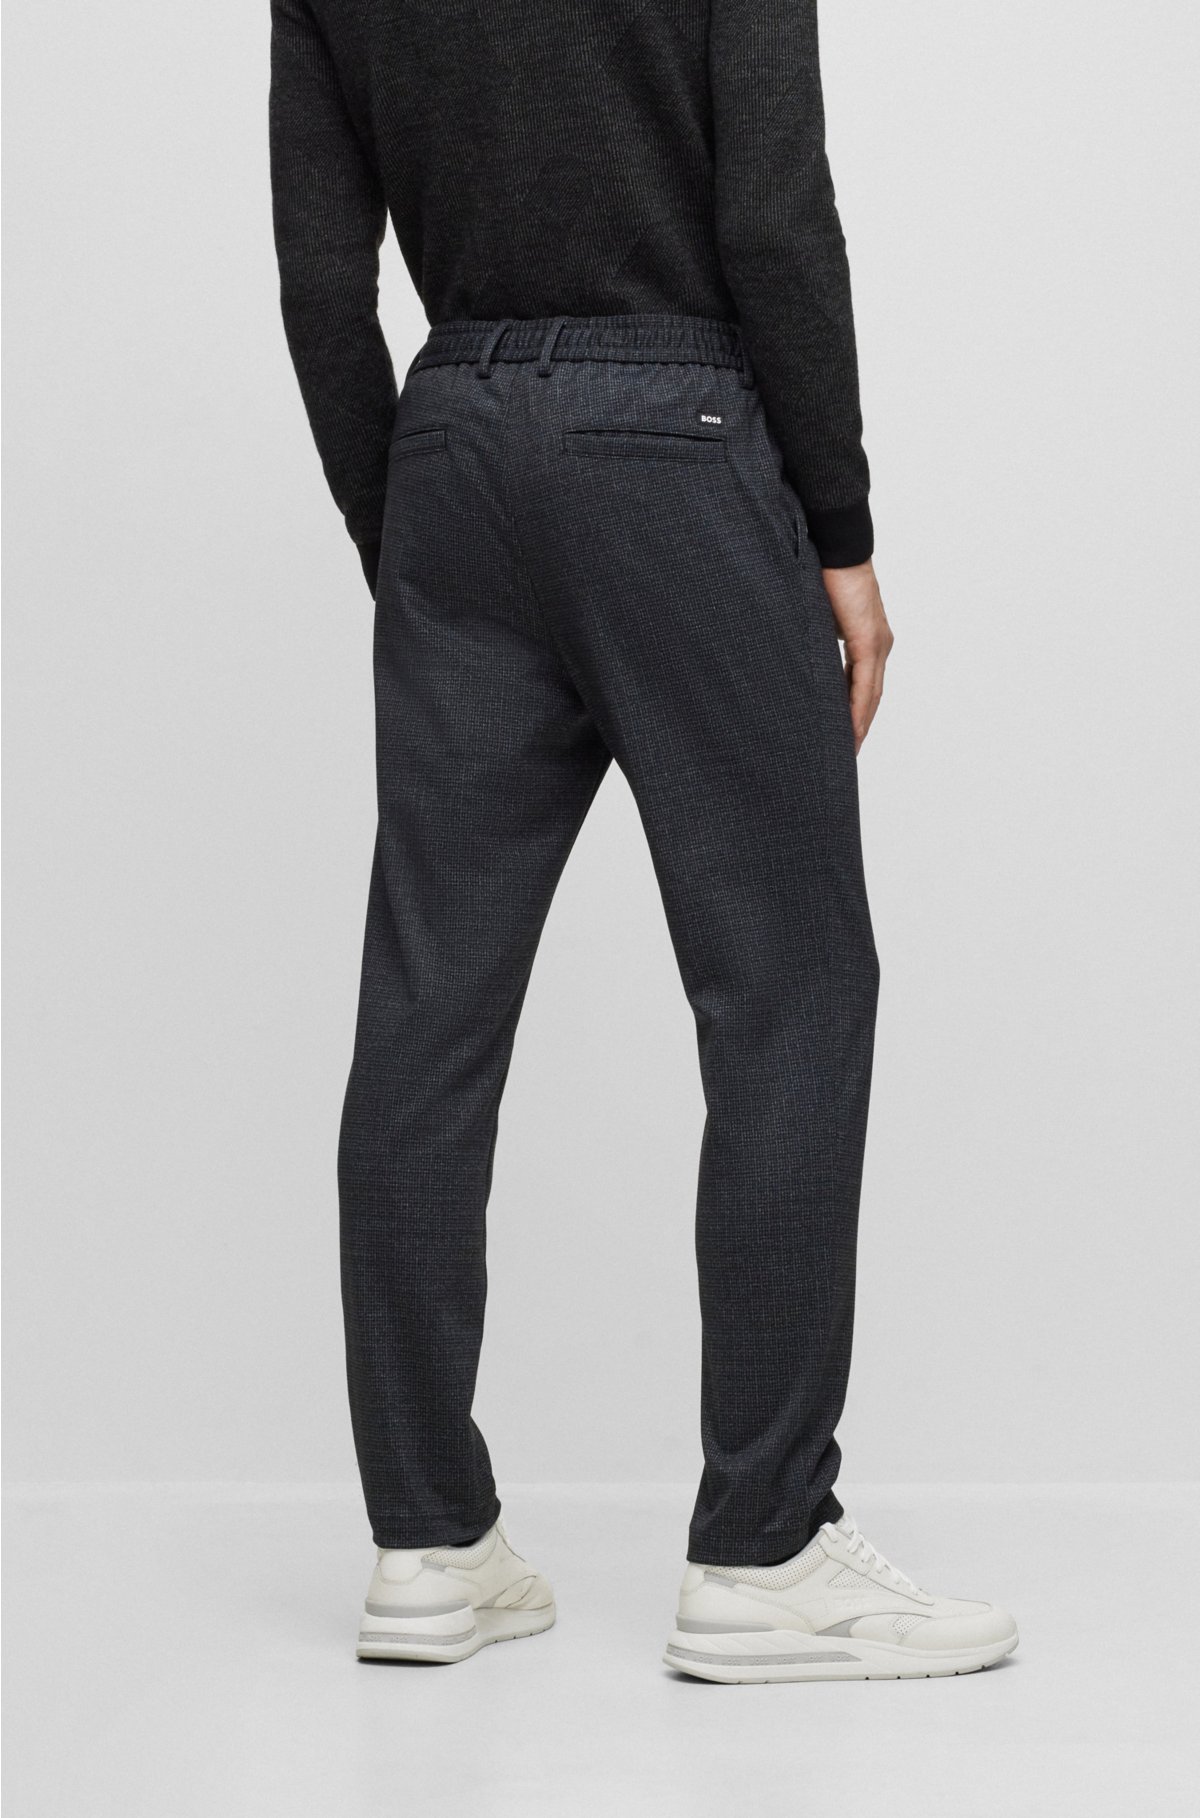 Regular tapered-fit trousers in patterned stretch jersey, Black